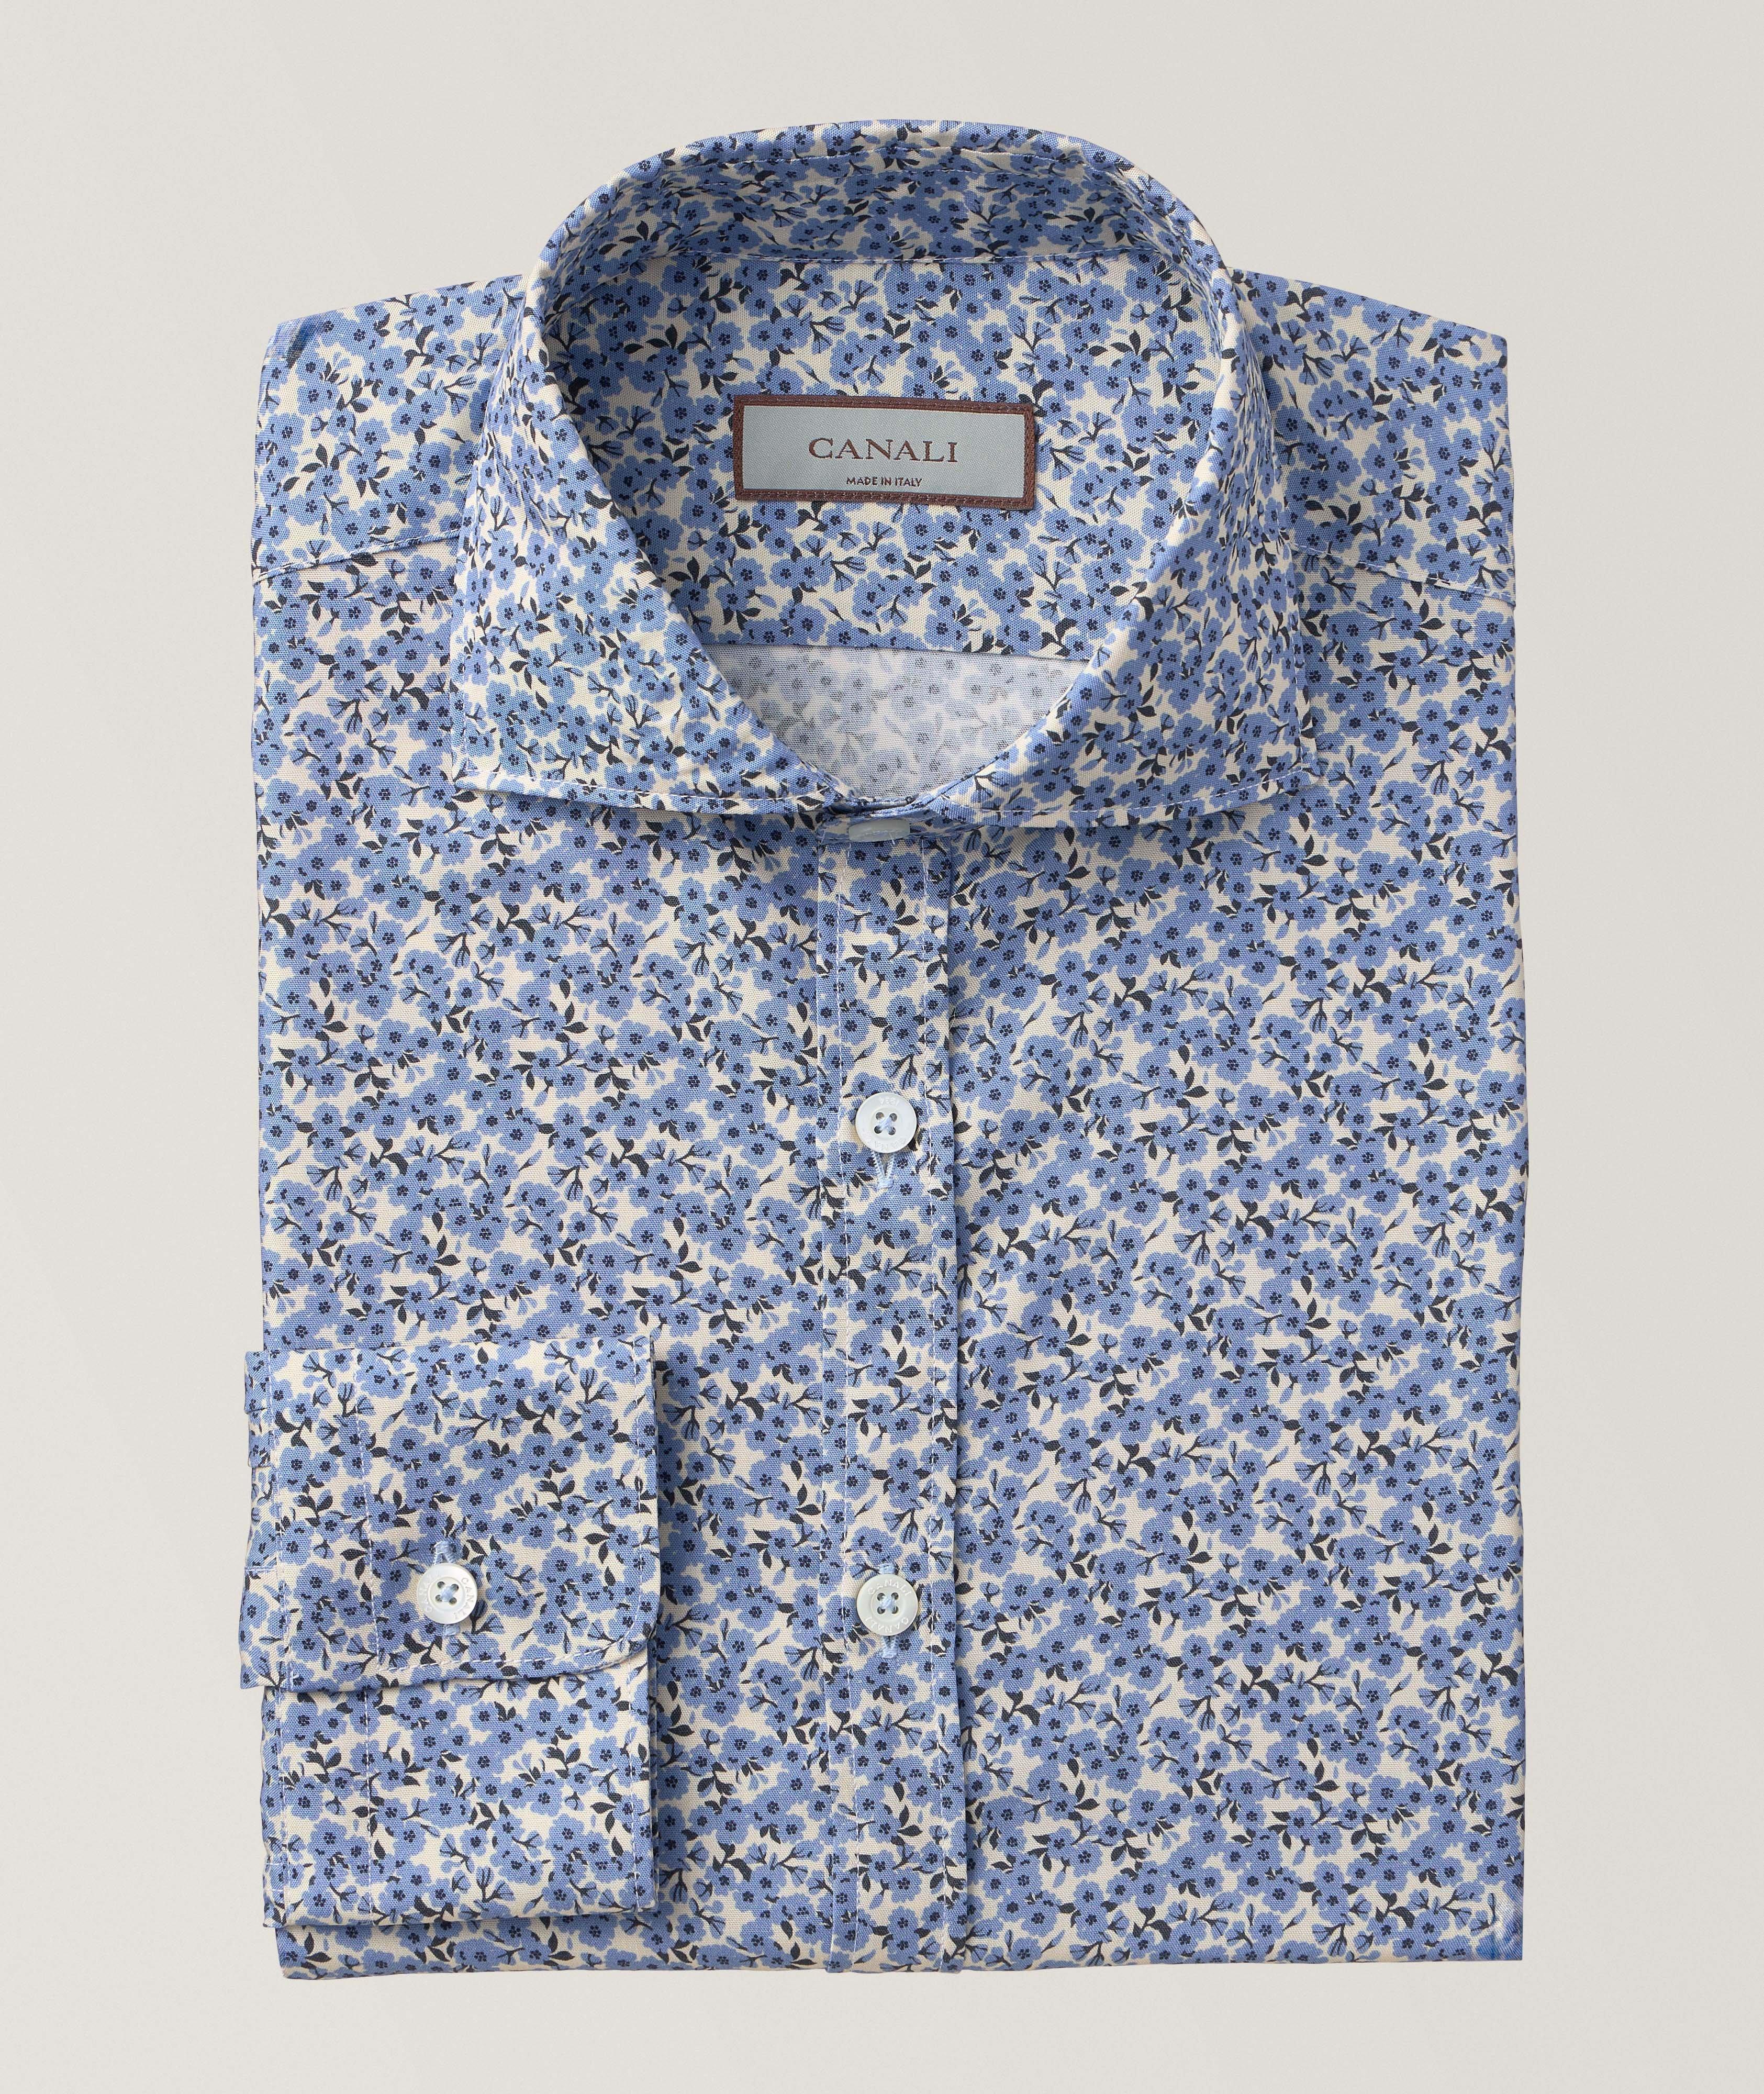 Canali Floral Lyocell Sport Shirt